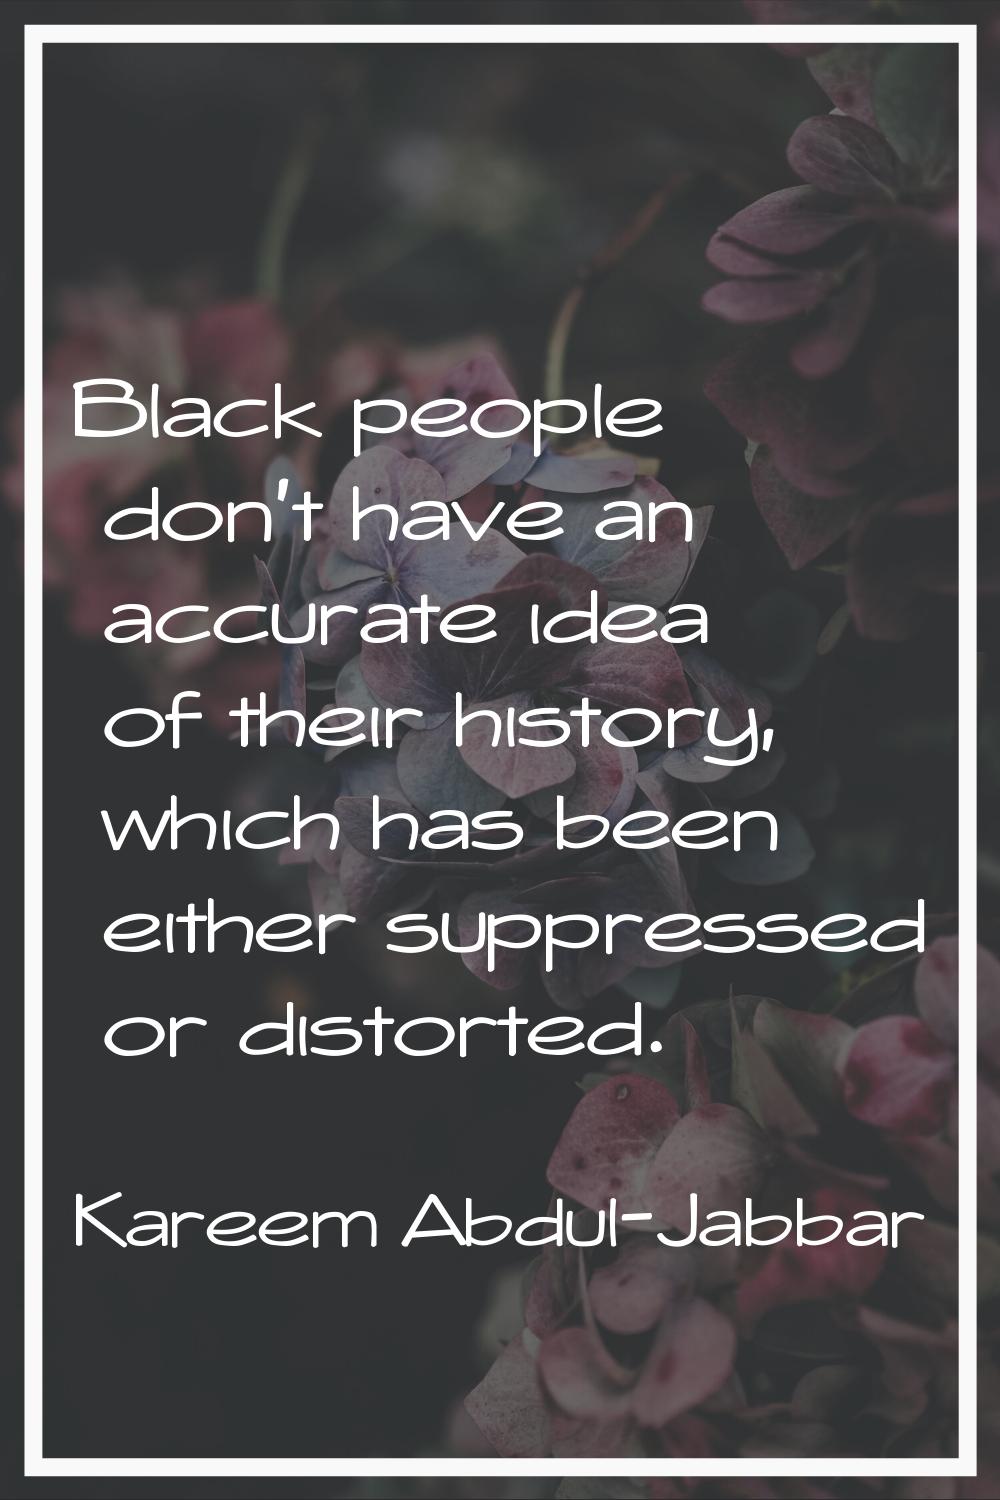 Black people don't have an accurate idea of their history, which has been either suppressed or dist